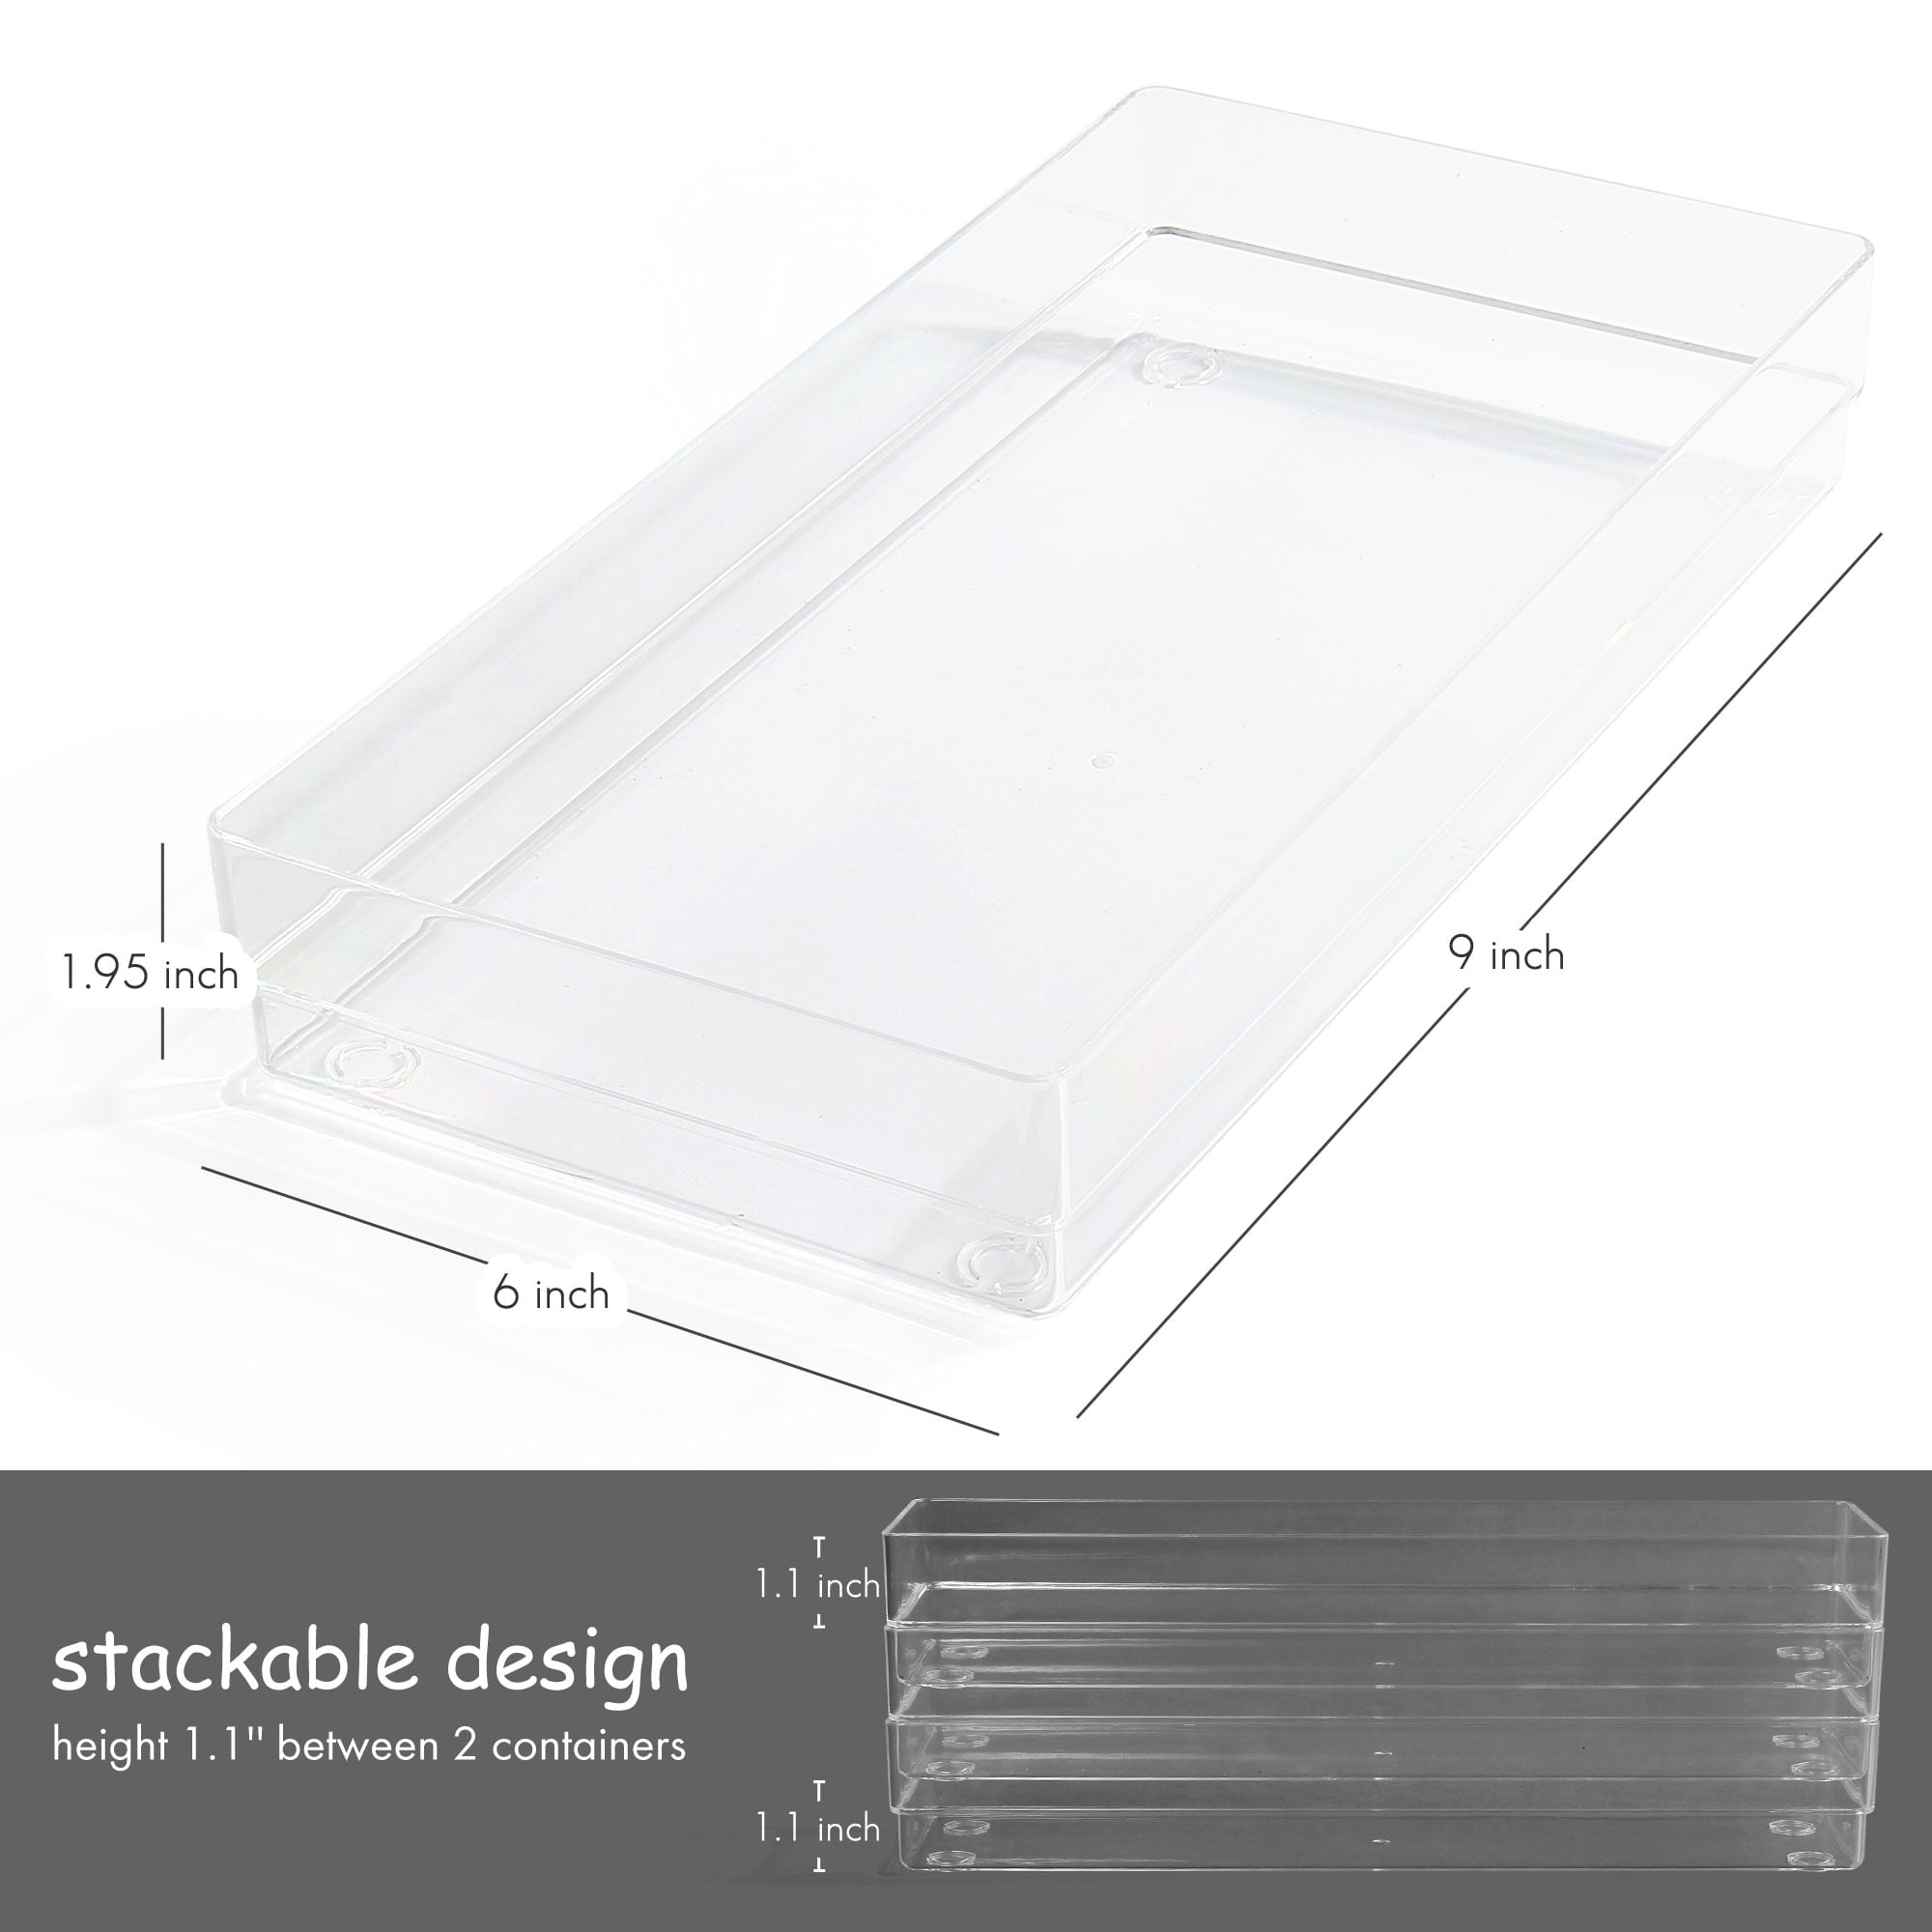 Clear 3-Drawer Organizer by Simply Tidy™